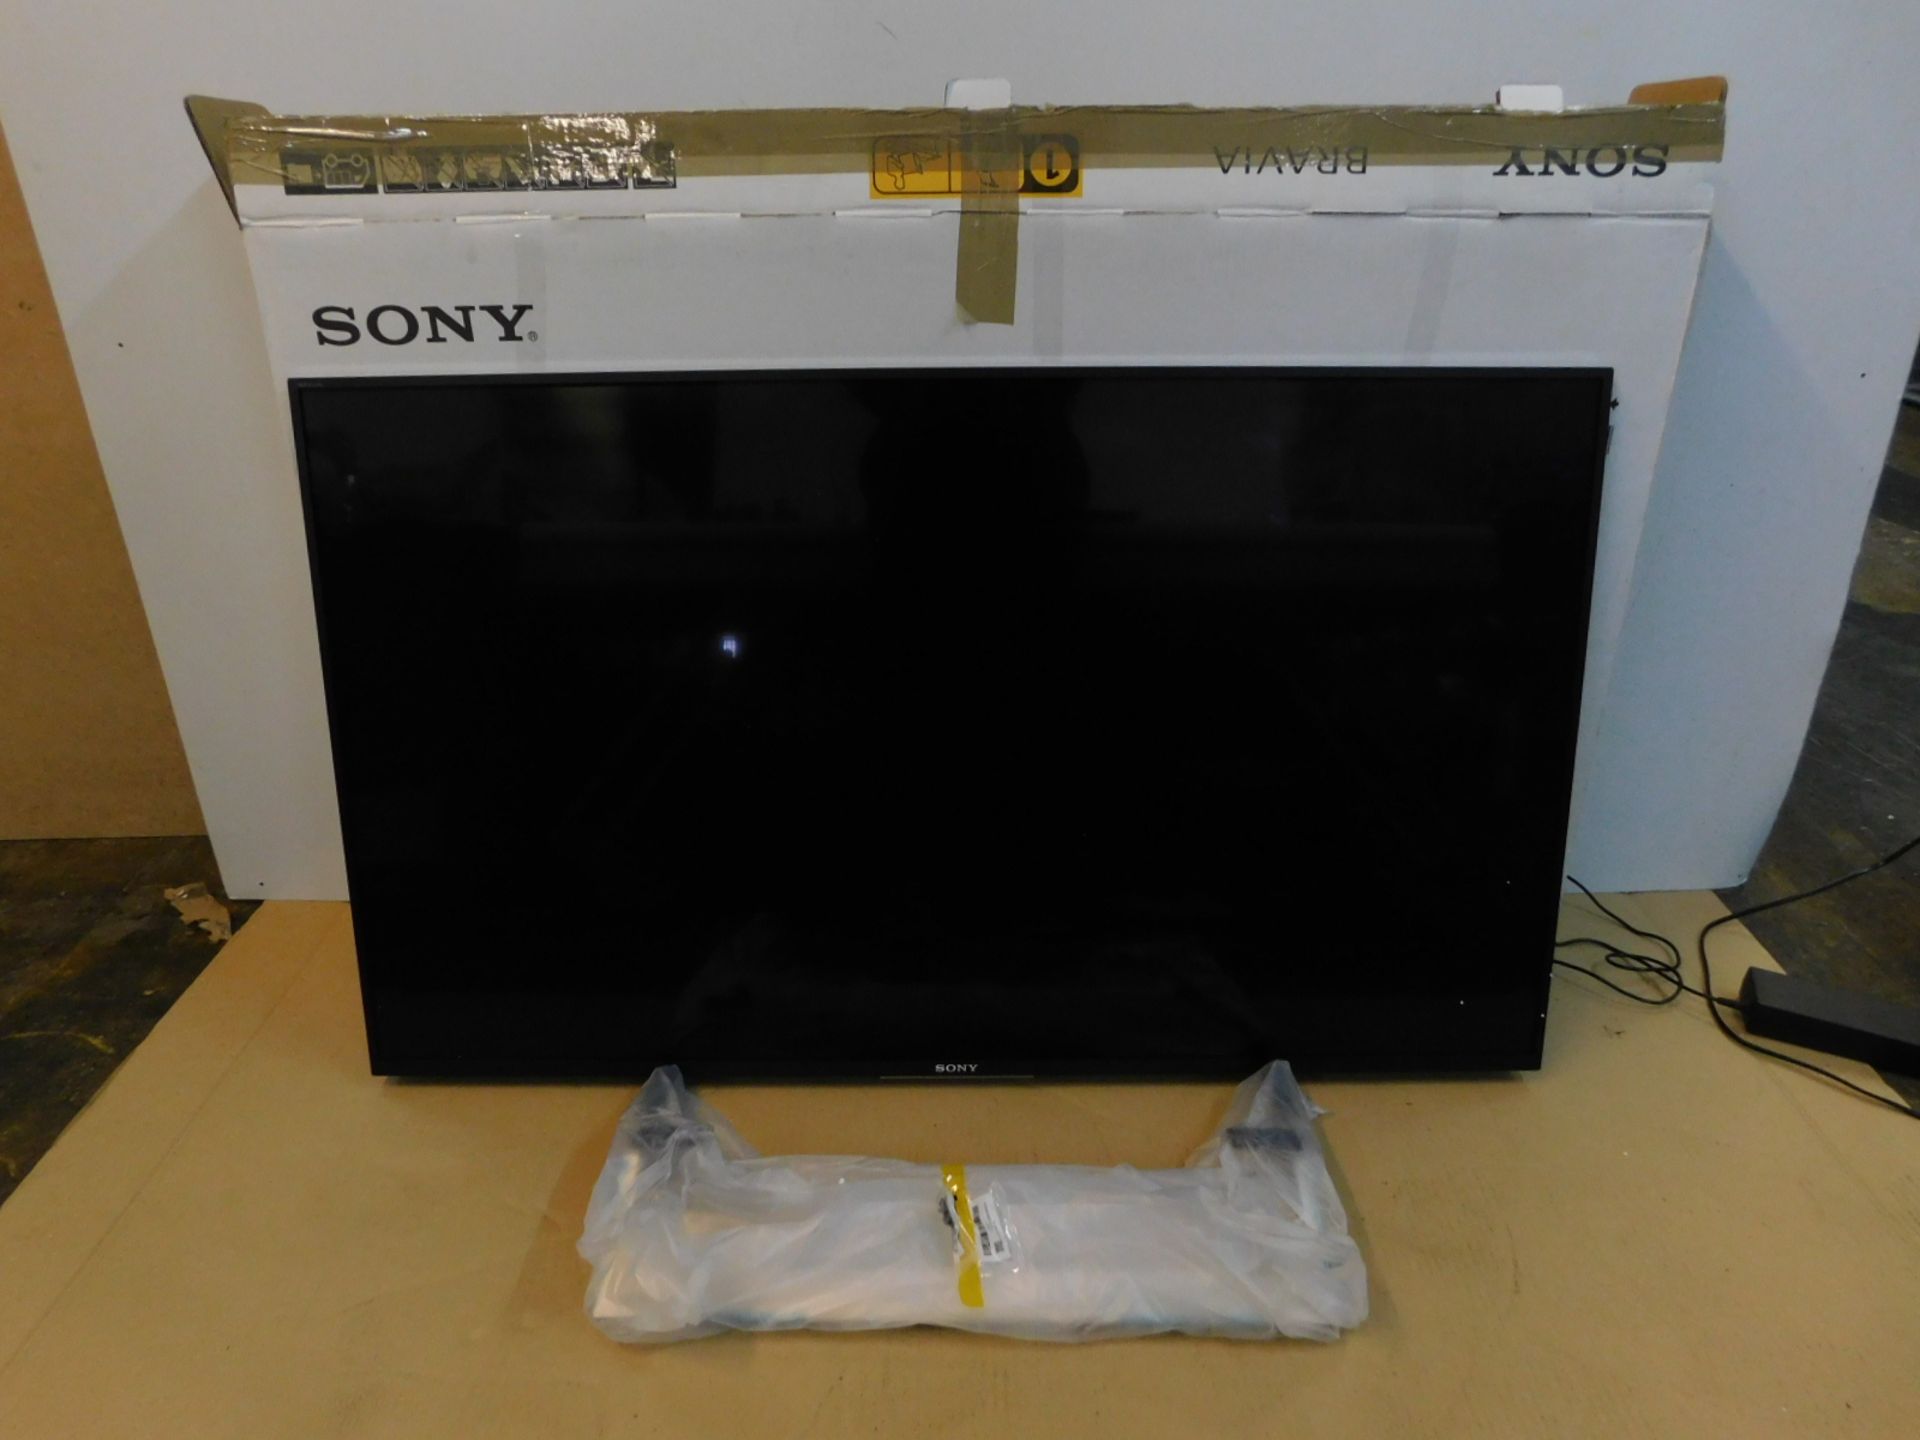 1 BOXED SONY BRAVIA 49" KD-49XF8096 4K ULTRA HD HDR SMART TV WITH STAND RRP Â£499 (DOESN'T POWER ON,